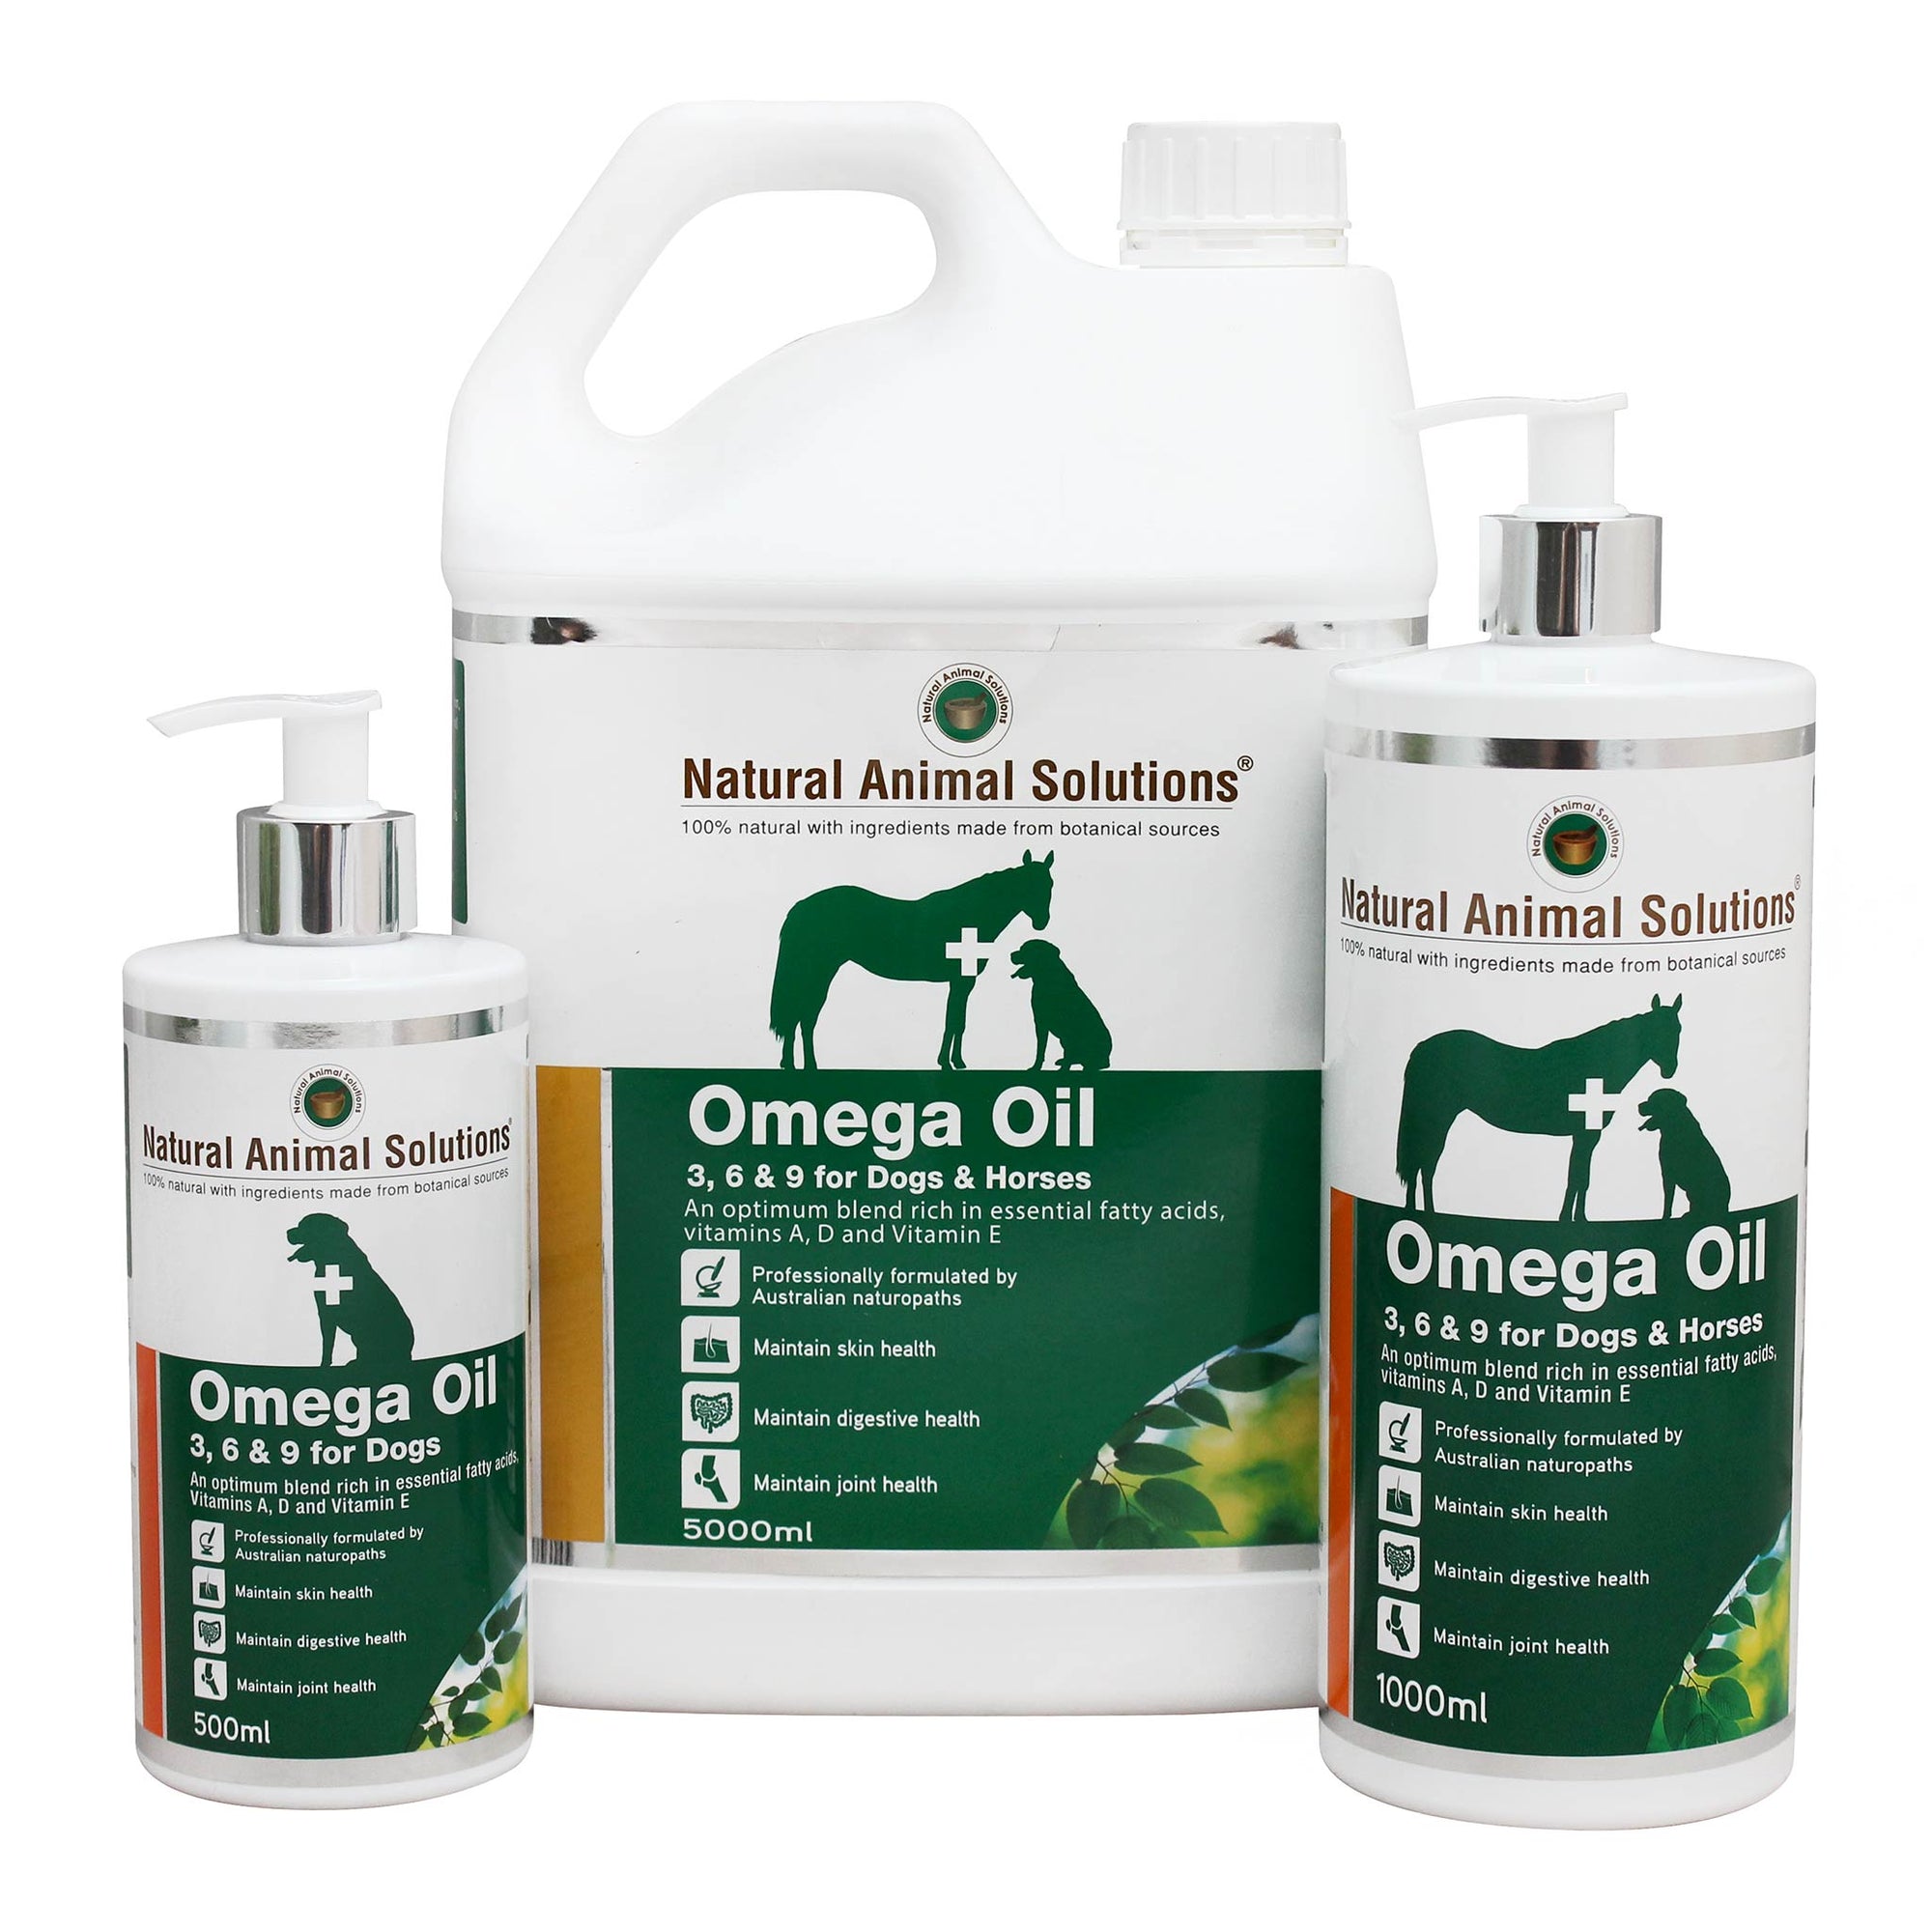 Natural Animal Solutions Omega 3, 6 & 9 Oil for Dogs and Horses